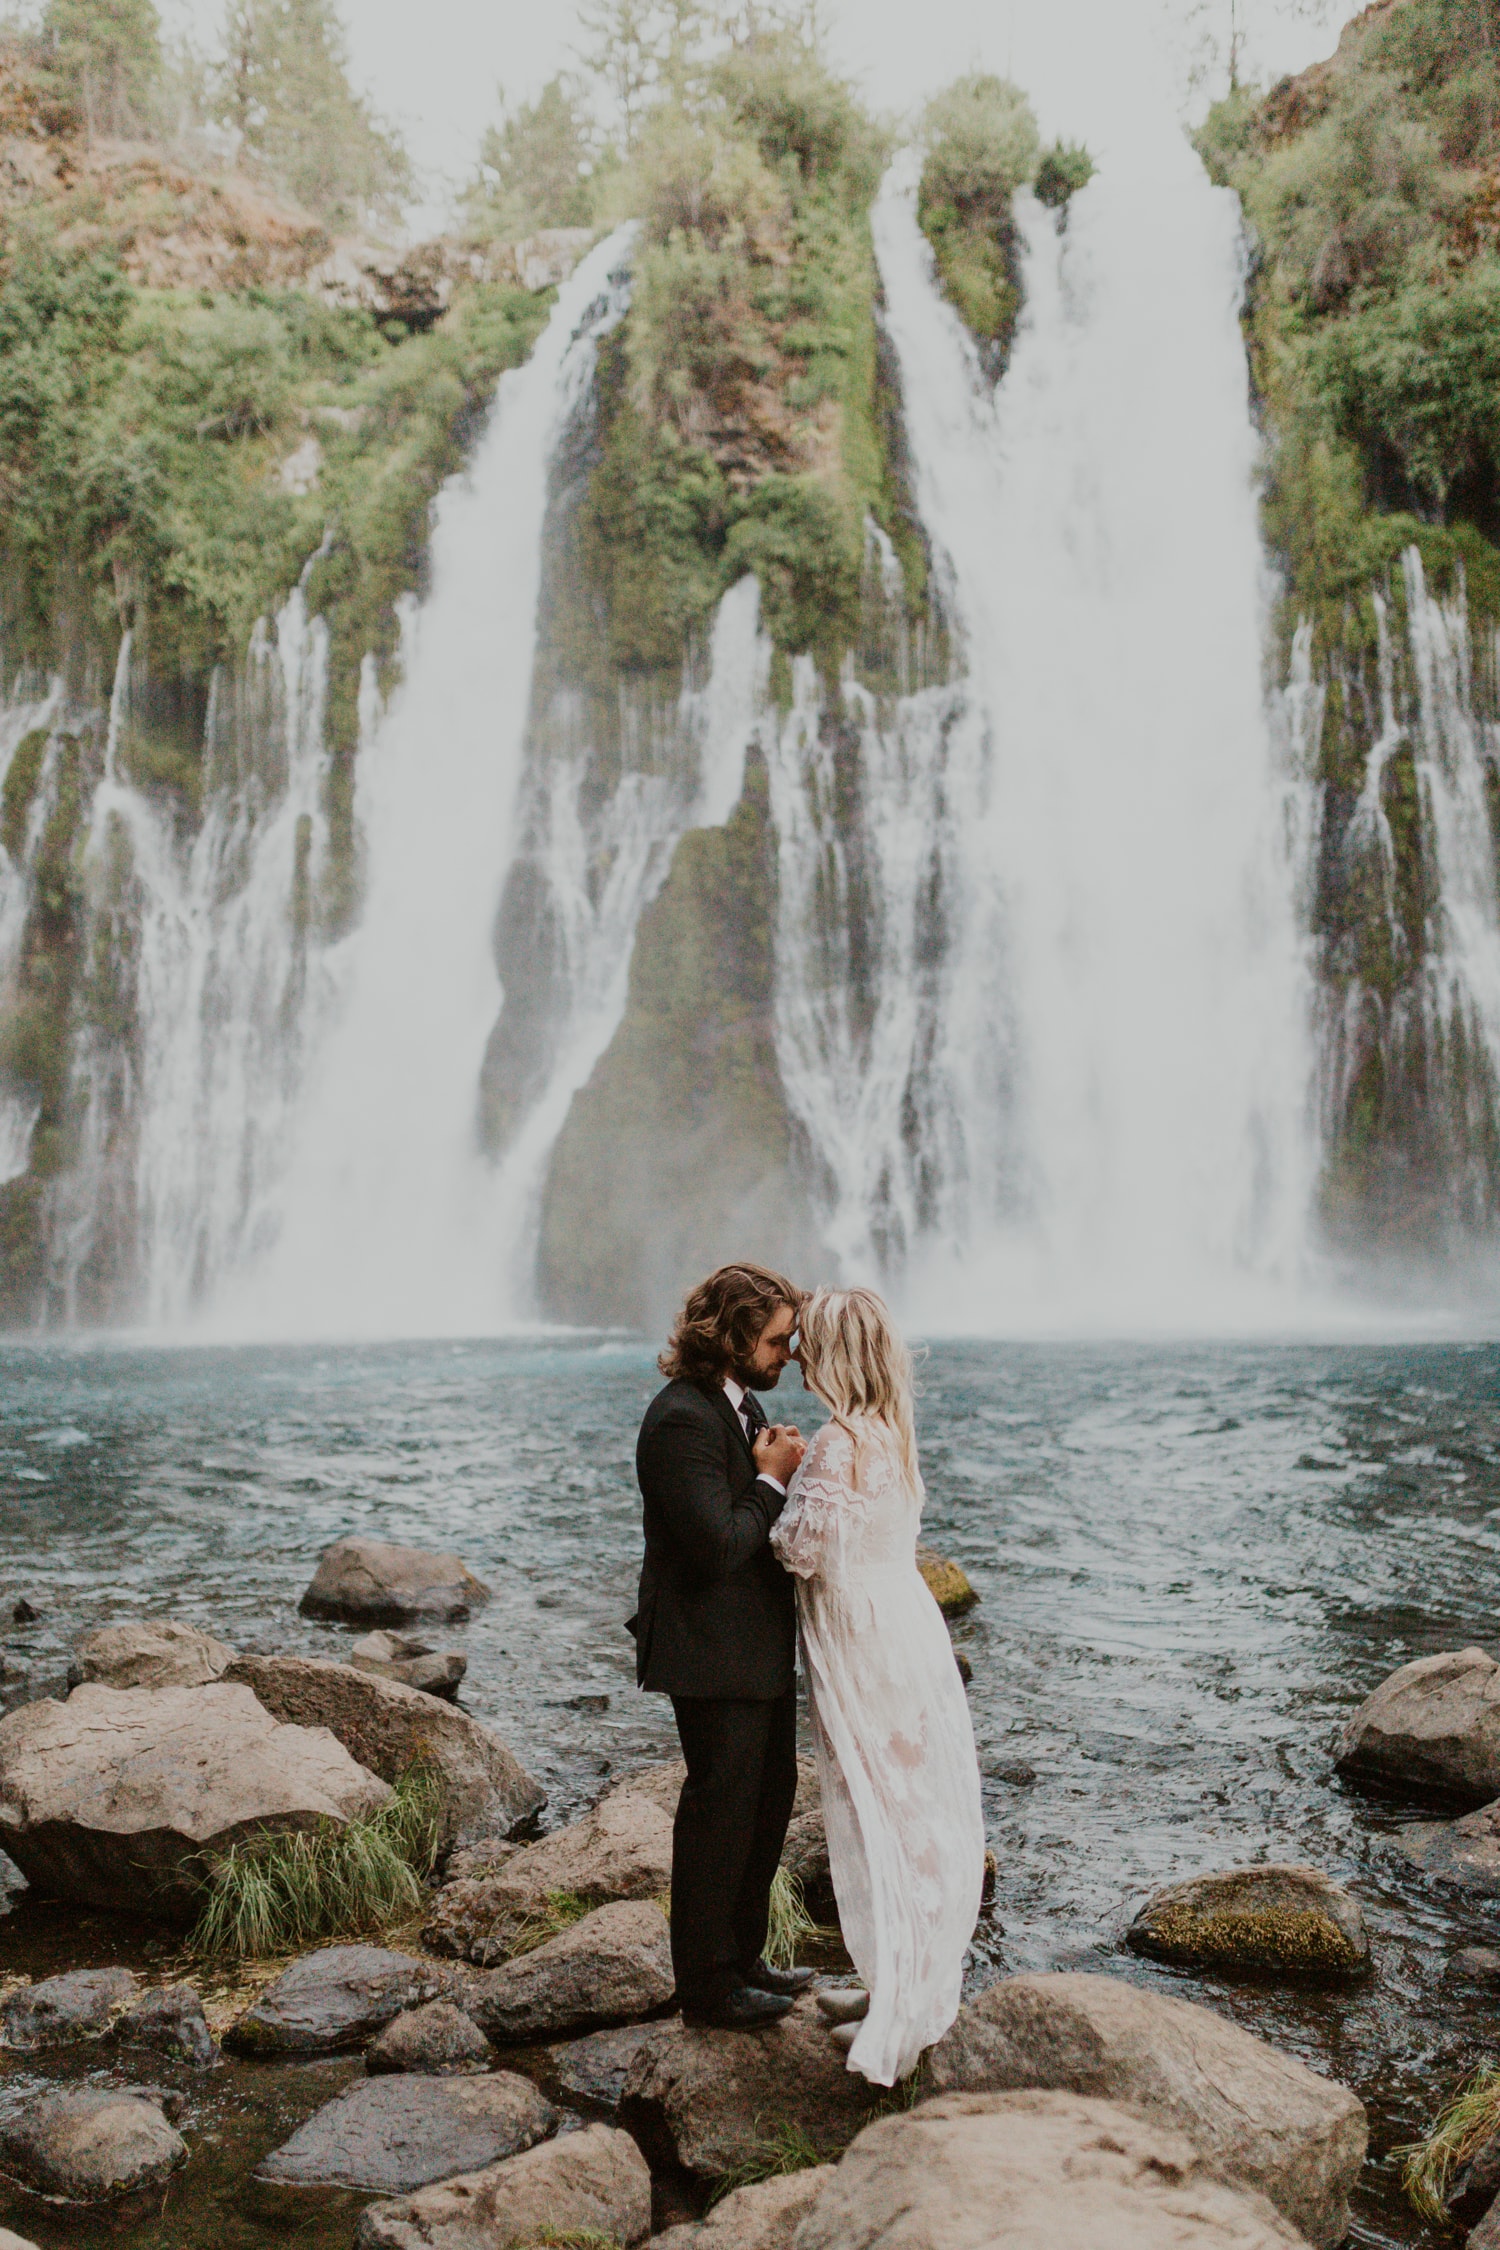 A couple eloping at a waterfall in California.